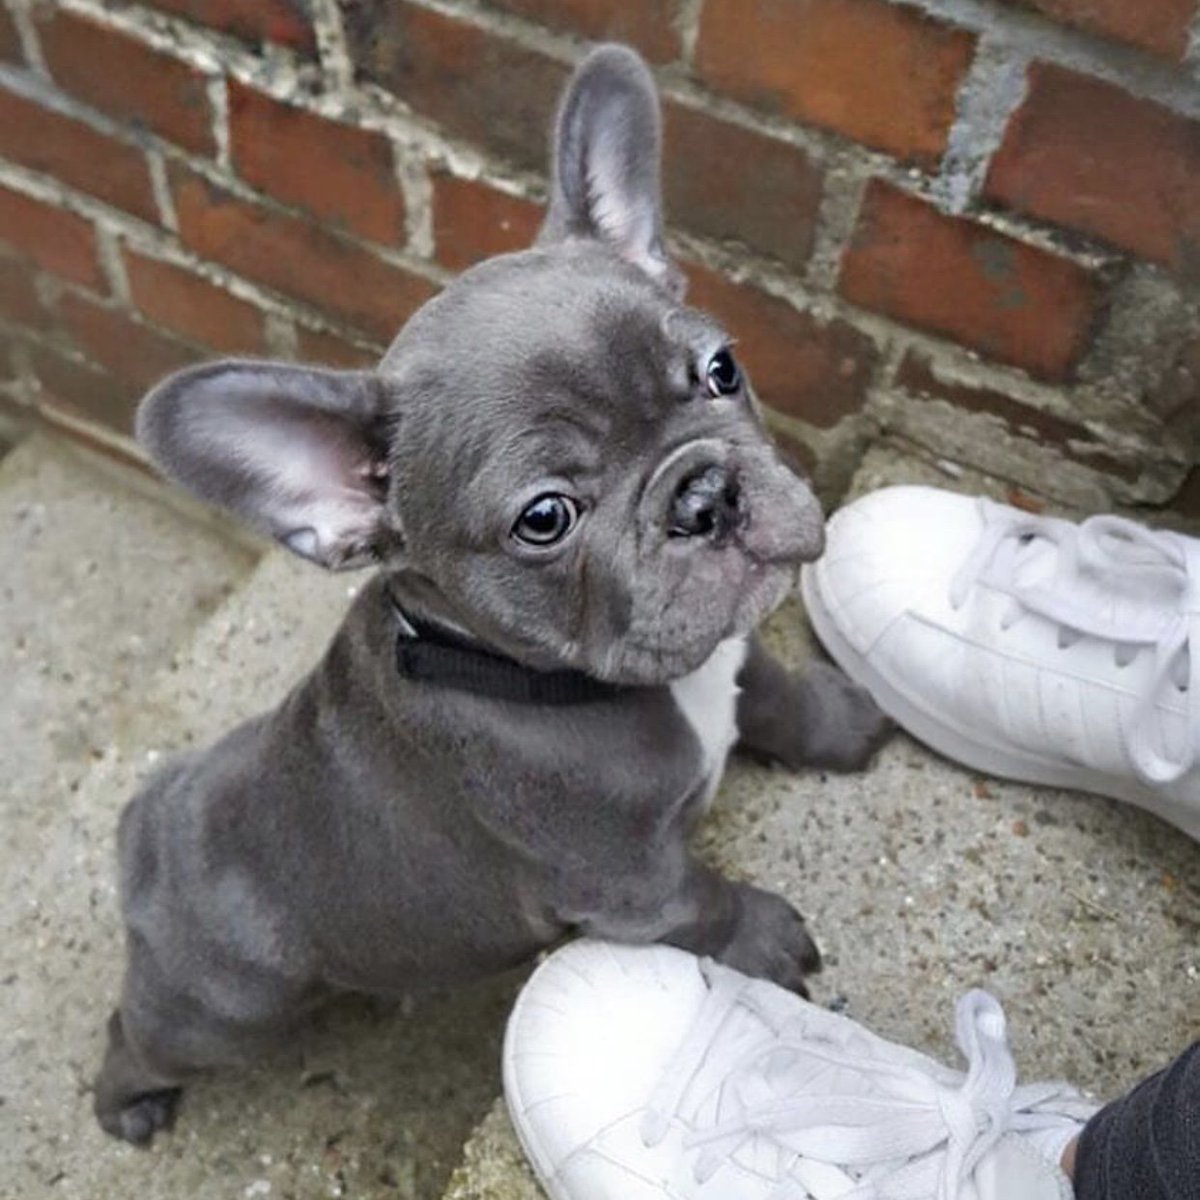 'Hi Mom, can I join the party?' I hope this adorable frenchie face makes your Wednesday a little better! 😊🐶 #ilovemyfrenchie #frenchbulldog #puppylove #pups